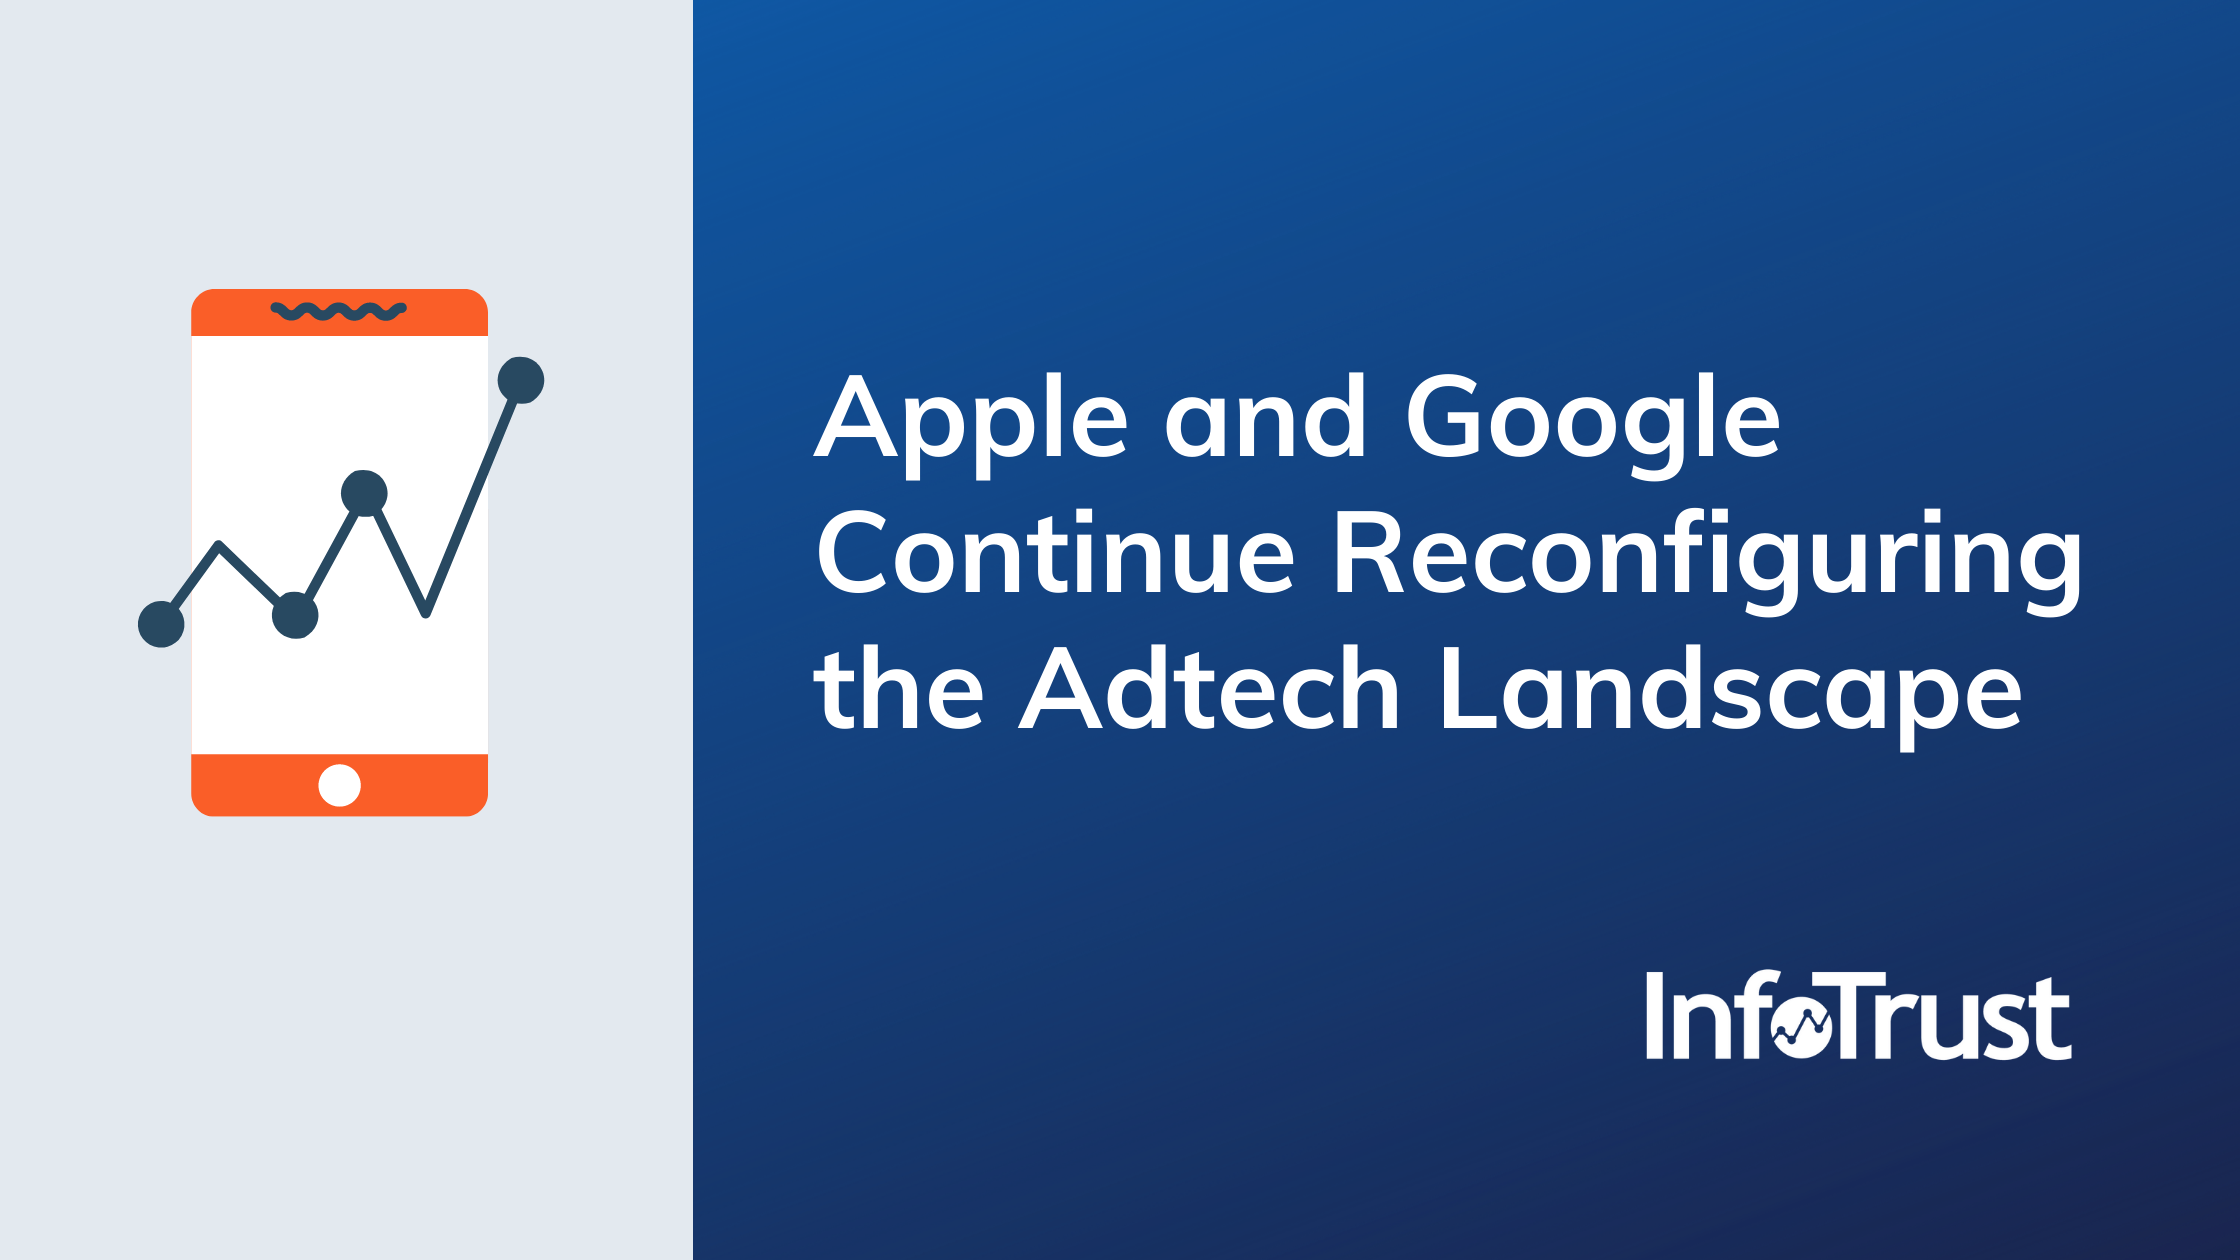 Apple and Google Continue Reconfiguring the Adtech Landscape